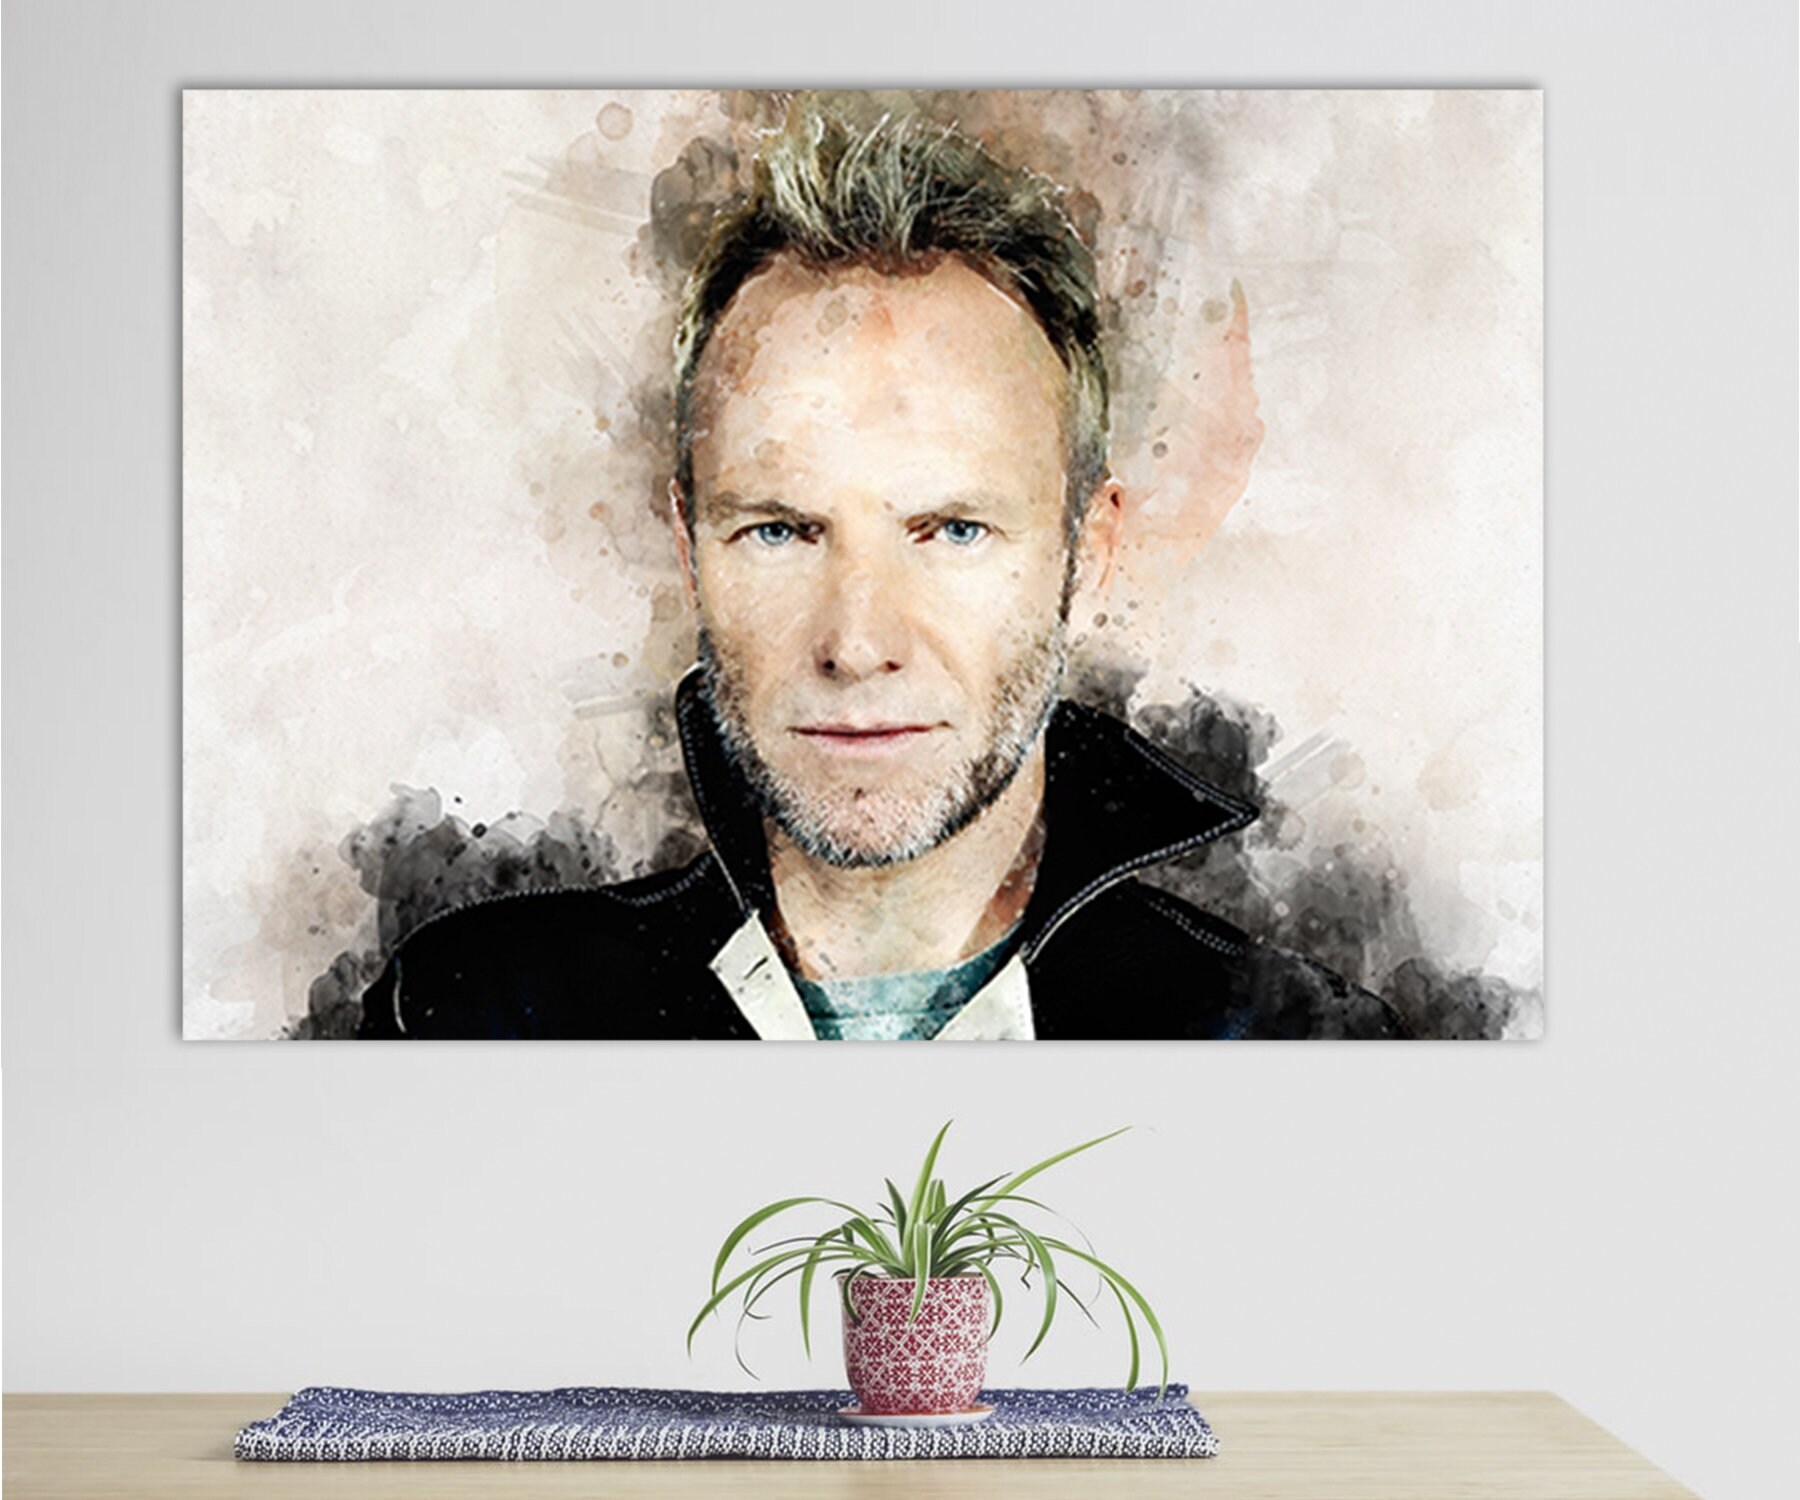 Sting Canvas Print, Sting Wall Art, Canvas Room Decor, Sting Fan Gift, Music Wall Art, Sting Poster, Sting Picture-1